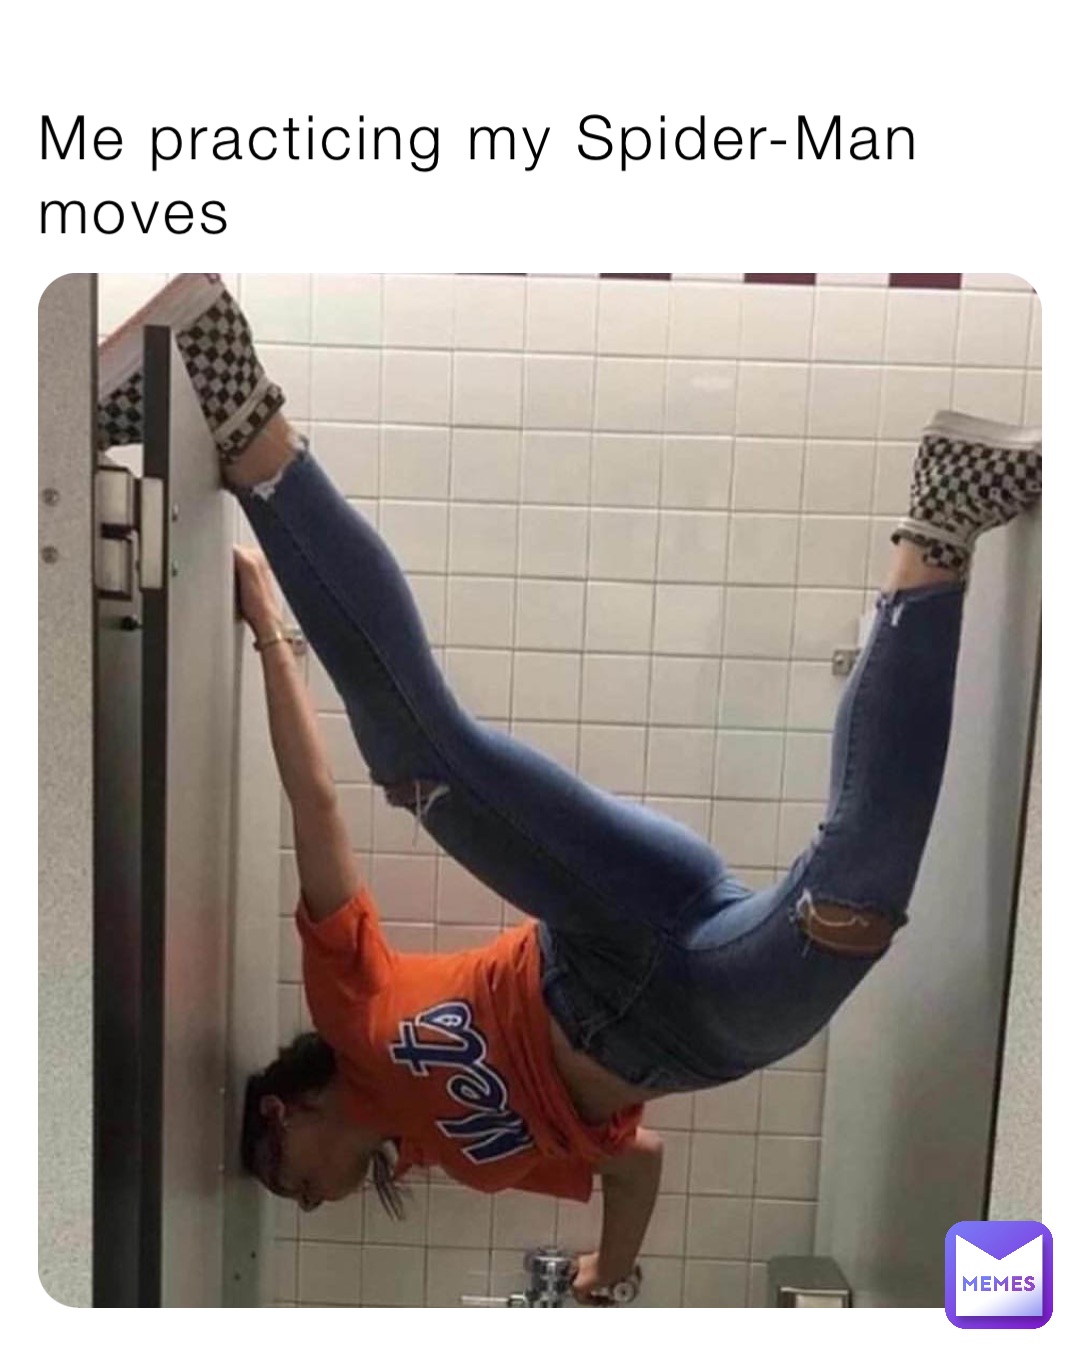 Me practicing my Spider-Man moves